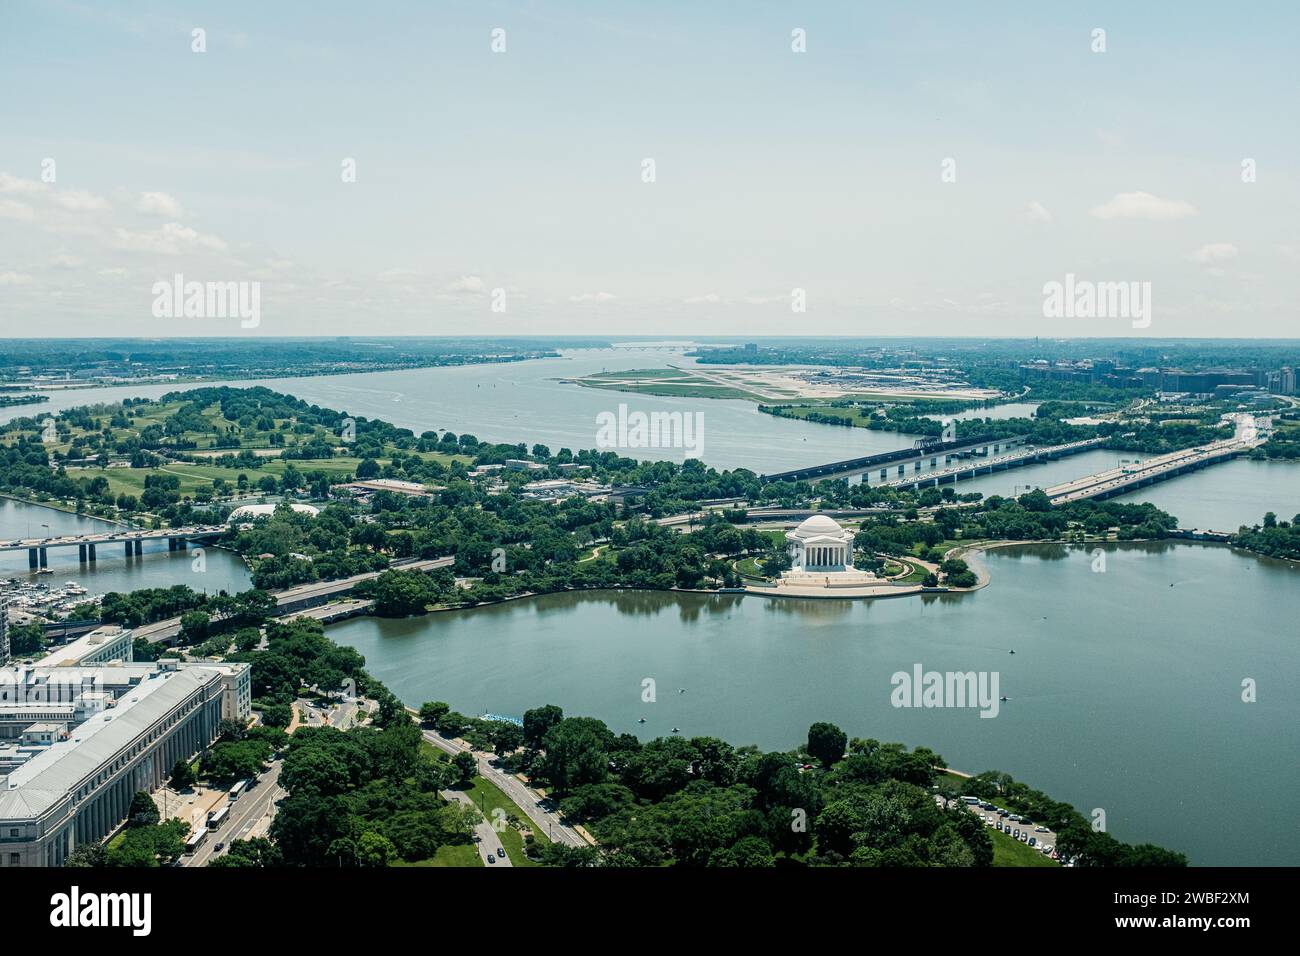 High angle view of Washington D.C. featuring the Jefferson Memorial and Ronald Reagan Washington National Airport. Stock Photo